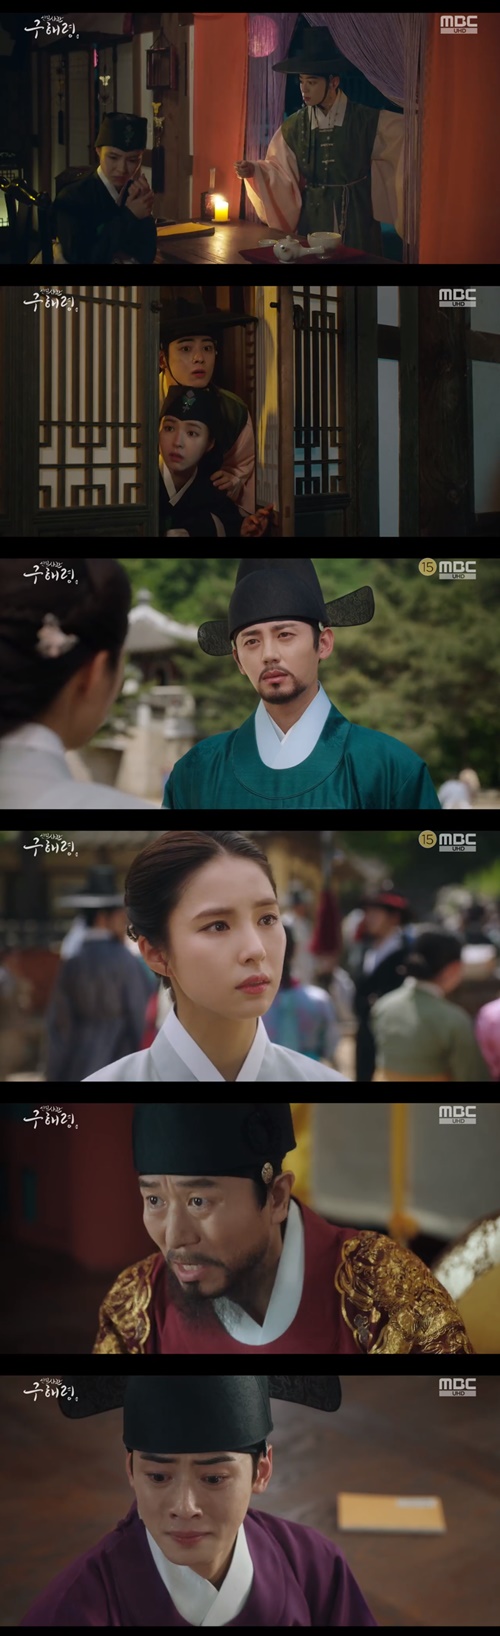 Shin Se-kyung, a new officer, challenged her at the same time without knowing anyone.In the New Entrepreneur Gu Hae-ryong broadcast on the 18th, Gu Hae-ryong (Shin Se-kyung) was shown to hold the wedding ceremony behind her and to hold her farewell poem.Lee Rim (Cha Eun-woo) noticed that Koo Hae-ryeong had acted as his own, and Lee told Koo Hae-ryong, The same was true of you, who had no head; a fraudster who makes money by posing as a plum.I was a plum artist, said Gu Hae-ryong, and was it a plum artist. Lee said, What is so proud of the subject of fraud?I am not the only one to be sorry, Irim said to the readers who came to see the plum. The hearts of those people are the truth.I am not a plum, but I pretended to be a plum, and I deceived you. He bowed to his readers, saying, I am sorry.The real plum teacher is coming, he said.Suddenly, the money department said, Take the plum and confiscate the book.So Irim was in danger of being caught, but it seemed that he was saving Lee from the Danger because he showed his base.But when he became dangerous to himself, he eventually pushed him away and ran away. He was imprisoned for a while and vowed to revenge him.Heo Sam-bo (Sung Ji-ru) saved Lee Lim from the Danger, falsely claiming that he was a plum to save Lee Lim.Gu Hae-ryong told Min Woo-won (Lee Ji-hoon) that he did not say a word while taking away the books he had collected for the rest of his life.I need to know what kind of reason I have taken people and whether I have searched the private house. Min Woo-won said, There was a name for smuggling books to disturb the river. Koo Hae-ryong rebelled against this and said, I hate the people who are now in the house and like to hate and hate.Lee Tae (Kim Min-sang) was angry when he found out that Irim had written a love story. He called Irim and said, How do you feel when you are praised by the foolish people for this ugly thing?Id rather play, he said angrily.Lee said, It is a book written to appease the right mind. However, Lee gave instructions to burn all the things related to the book, paper, brush, etc. of the bookstore.Irim was eager to take his name, but Itae was straight.I will do my best to do my best, said Sahee (Park Ji-hyun), daughter of Lee Cho Jeong-rang, who visited Min Ik-pyeong (Choi Deok-moon) saying, I need help to do so.The day of the wedding came, and the old man, who had no desire to marry, secretly fled from Koo Jae-kyung (Fairy Hwan). The place where Gu Hae-ryeong arrived in a breathtaking run was the place where she took a farewell visit.On the other hand, New Entrepreneur Koo Hae-ryong is broadcast every Wednesday and Thursday at 8:55 pm.Photo MBC broadcast screen capture